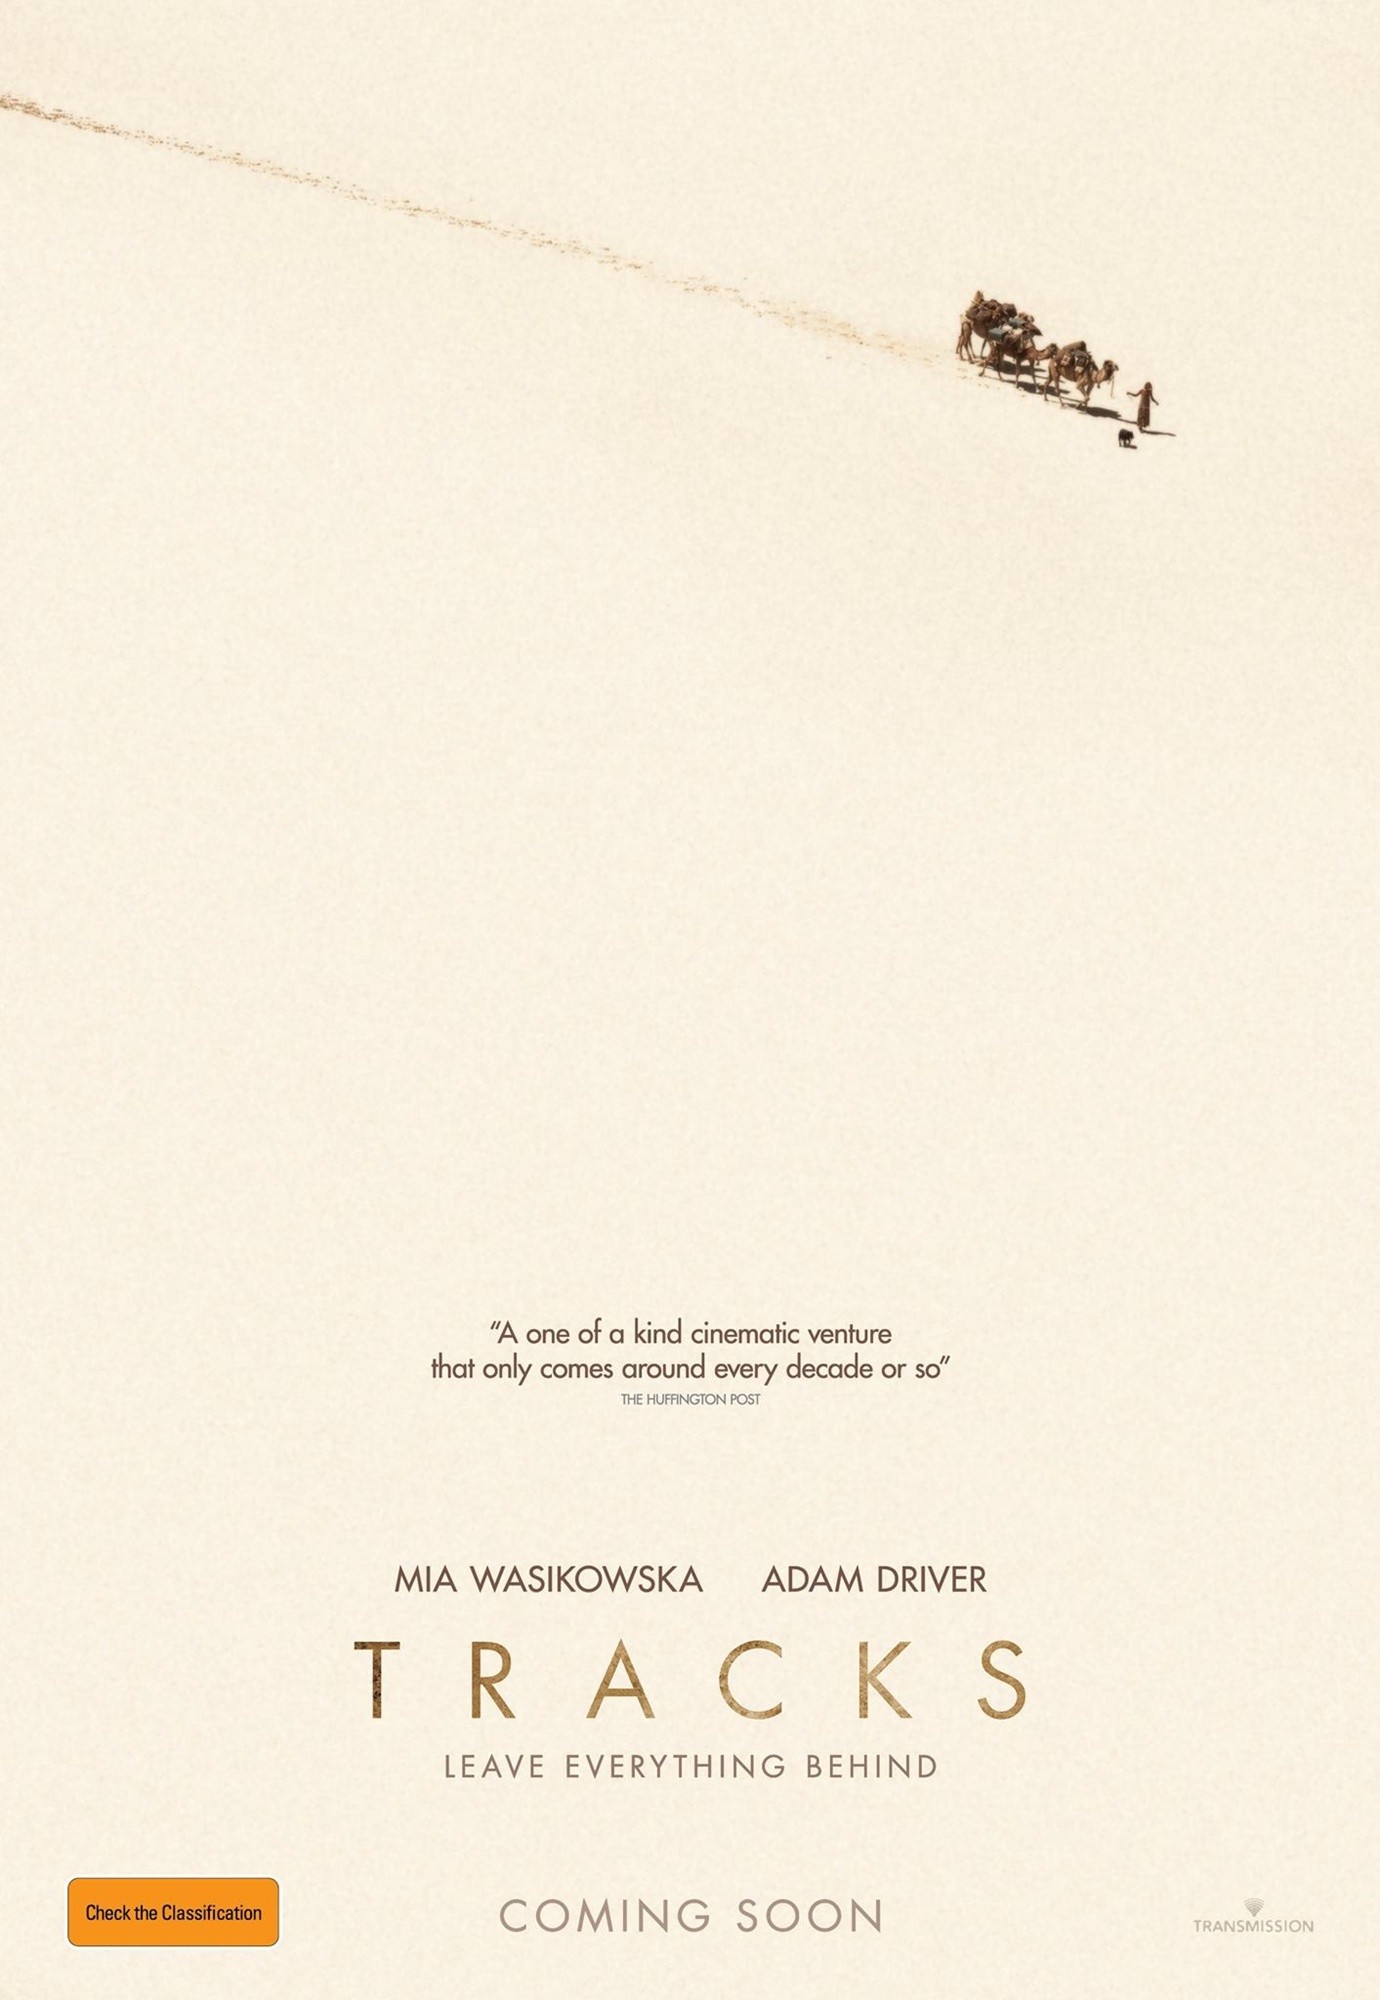 Poster of The Weinstein Company's Tracks (2014)